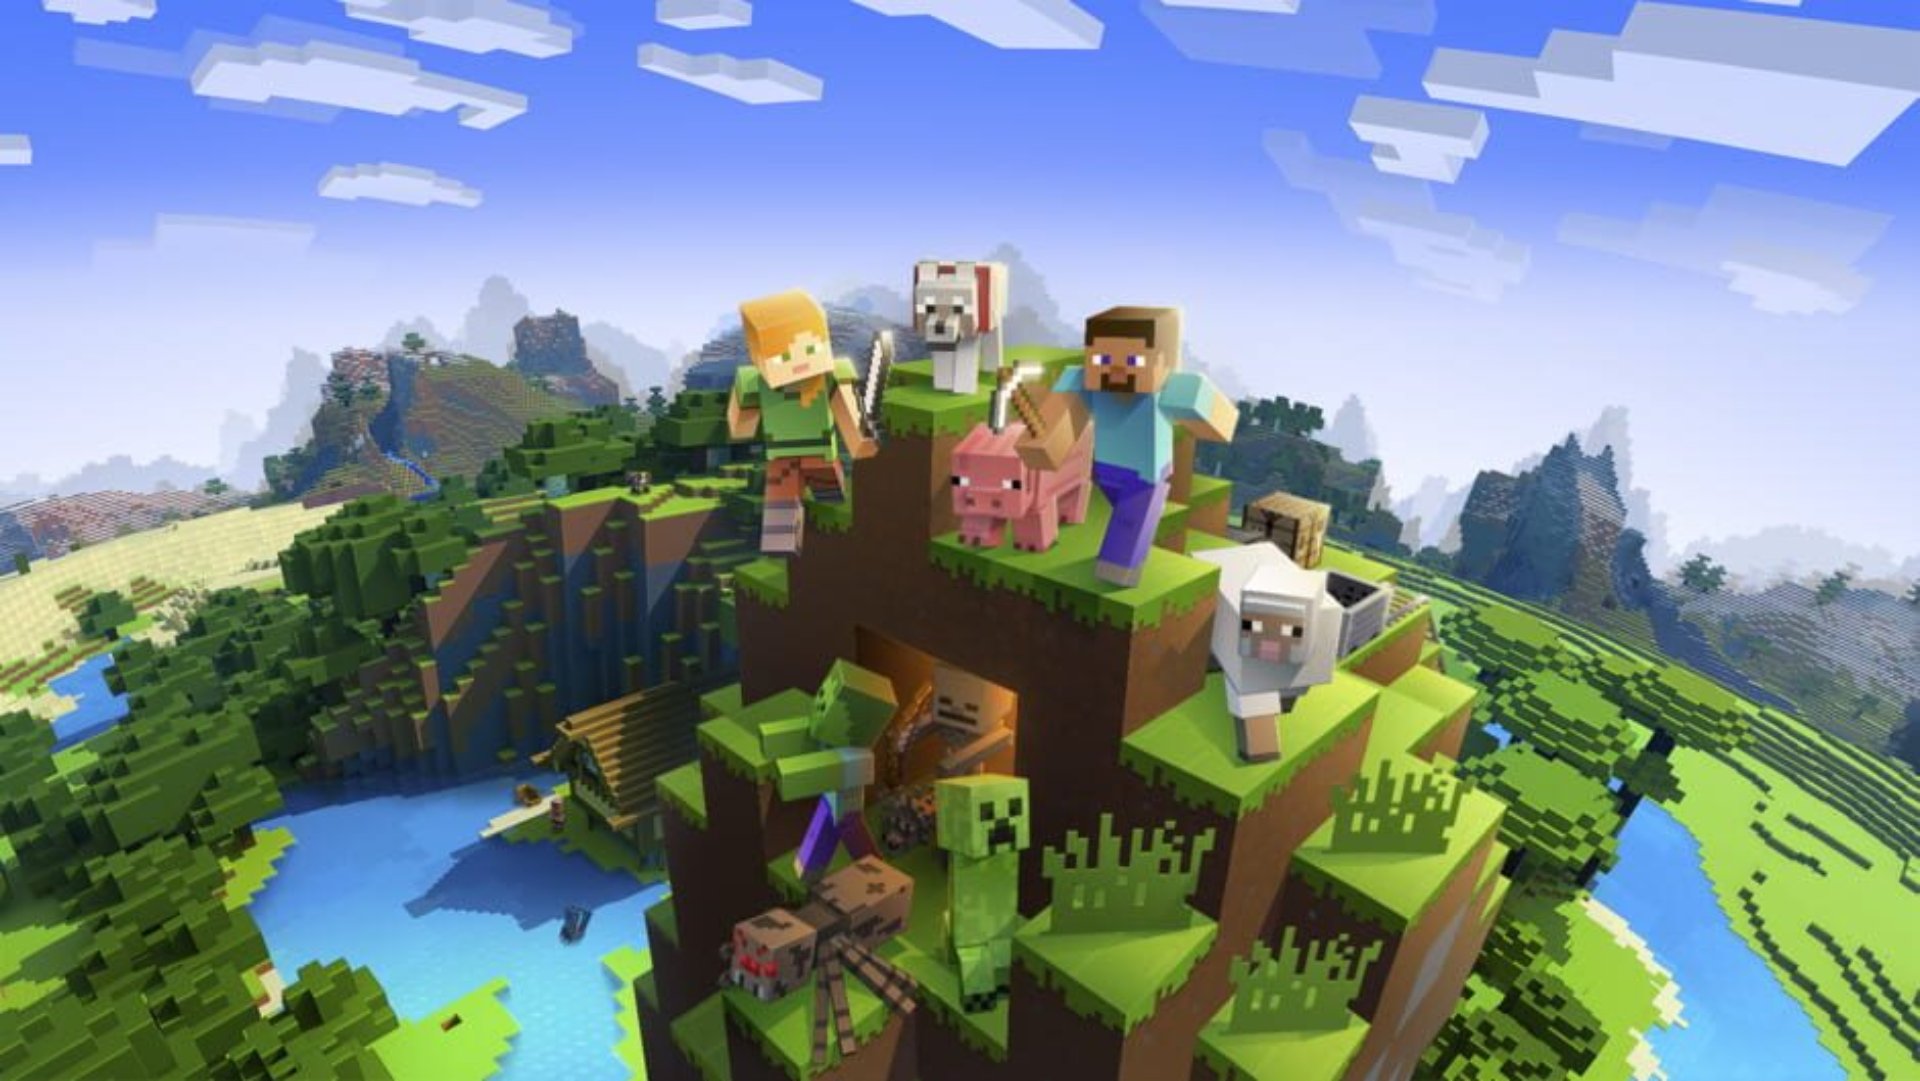 How to download minecraft in pc a far cry from africa pdf download